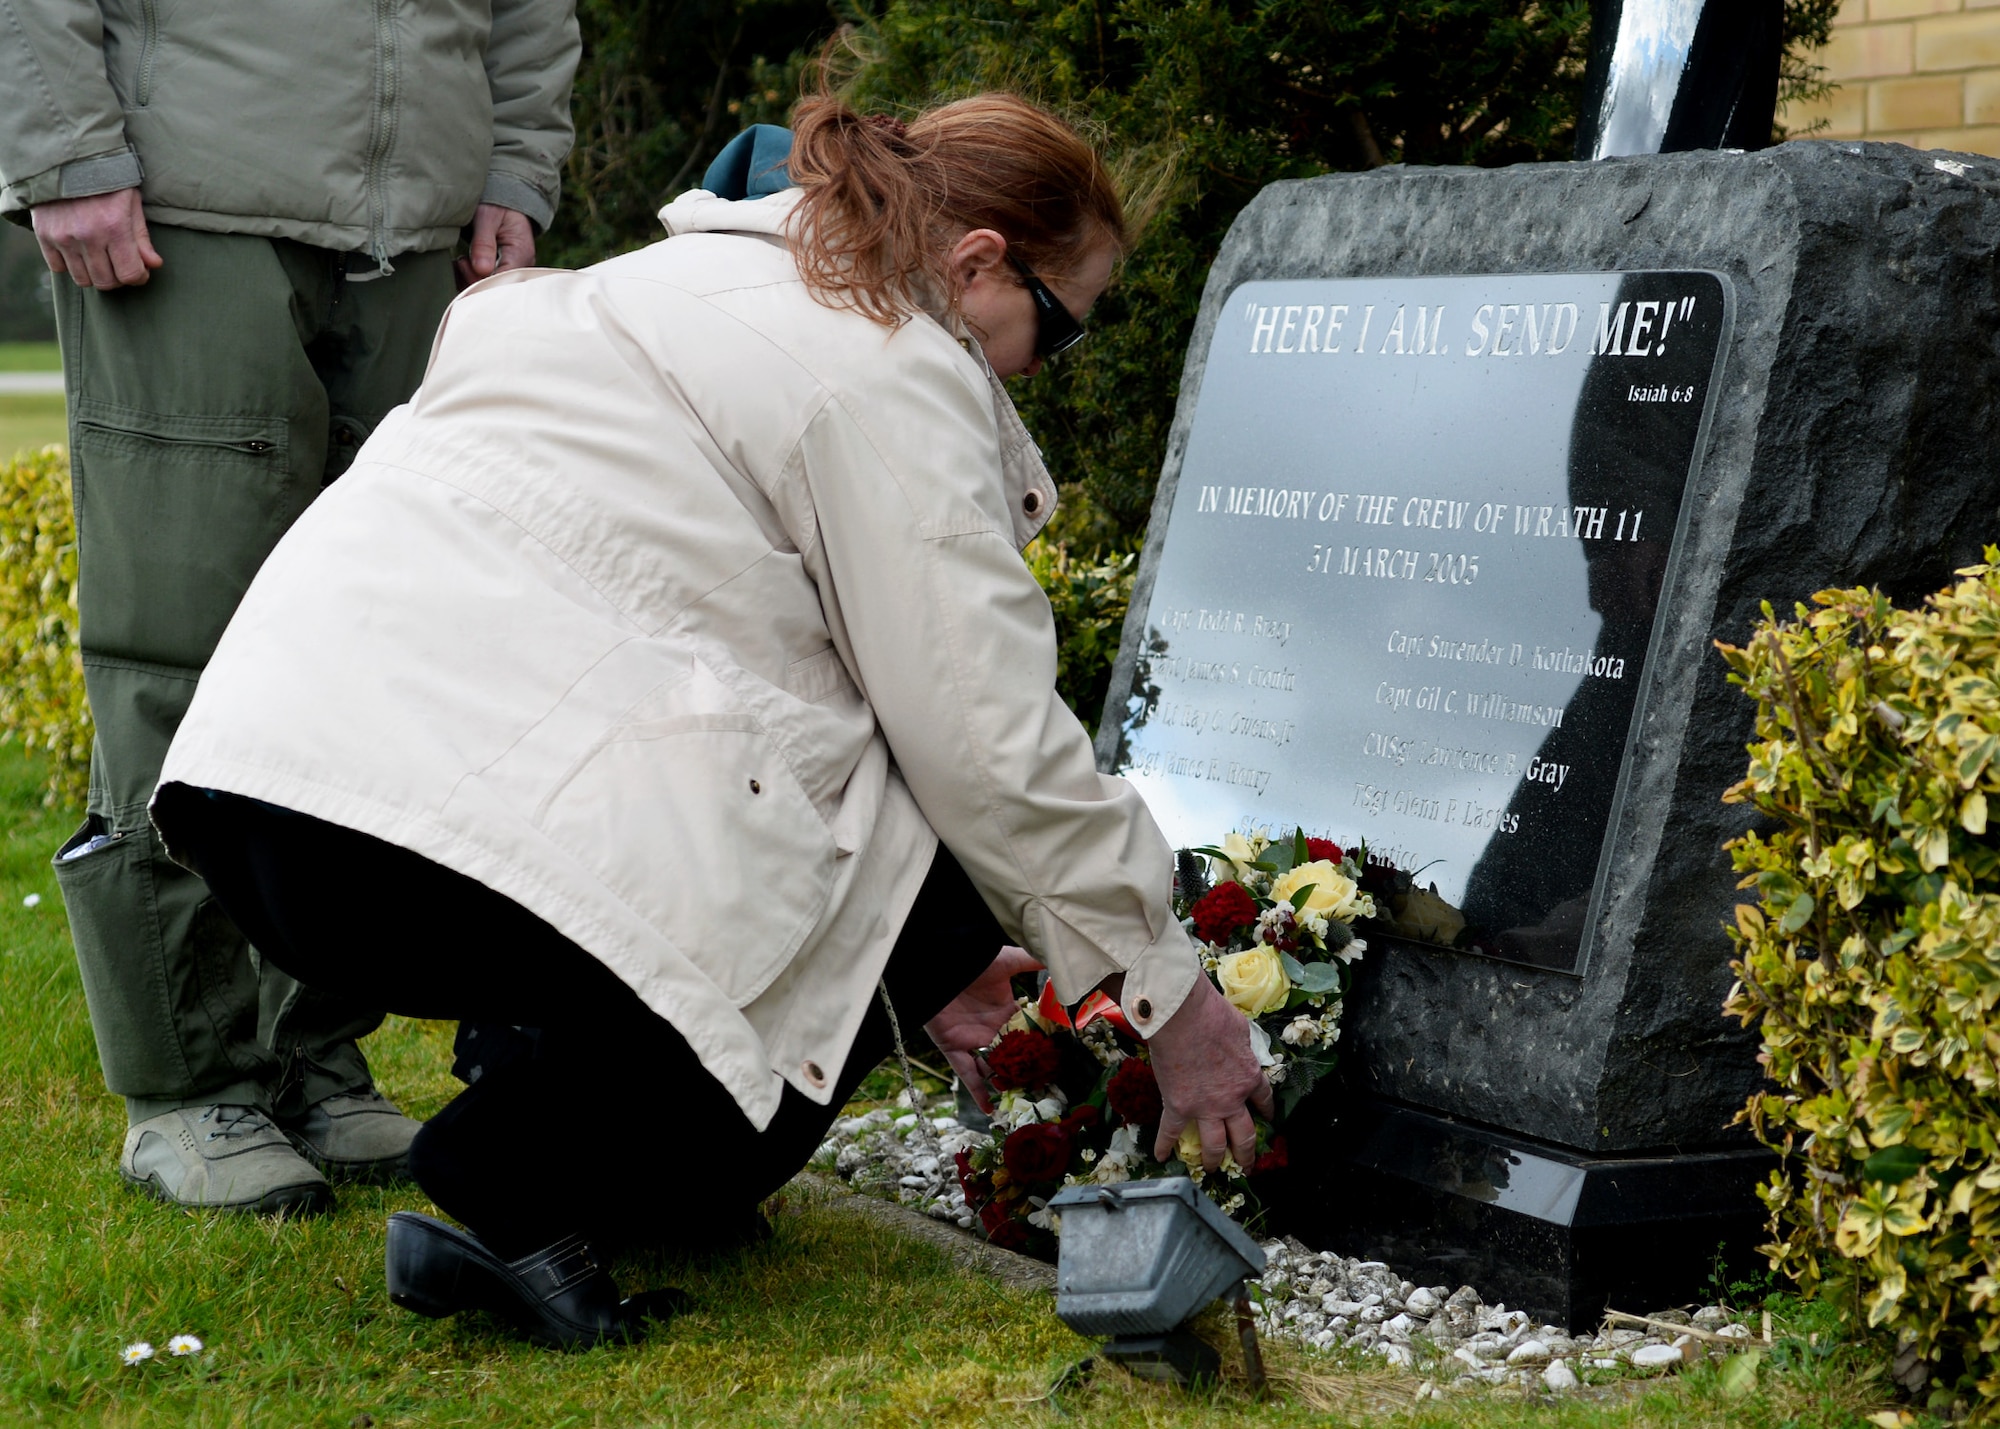 Greta Kothakota, the mother of deceased U.S. Air Force Capt. Surrender D. Kothakota, during the remembrance ceremony March 31, 2015, at the 7th Special Operations Squadron on RAF Mildenhall, England. The ceremony, held in honor of the 10th anniversary of the nine Airmen who died when WRATH-11, an MC-130H Combat Talon II assigned to the 7th SOS, crashed in Albania on March 31, 2005. The flight was part of a training exercise with two other aircraft to train on low-level and low-light flying. (U.S. Air Force photo by Senior Airman Victoria H. Taylor)